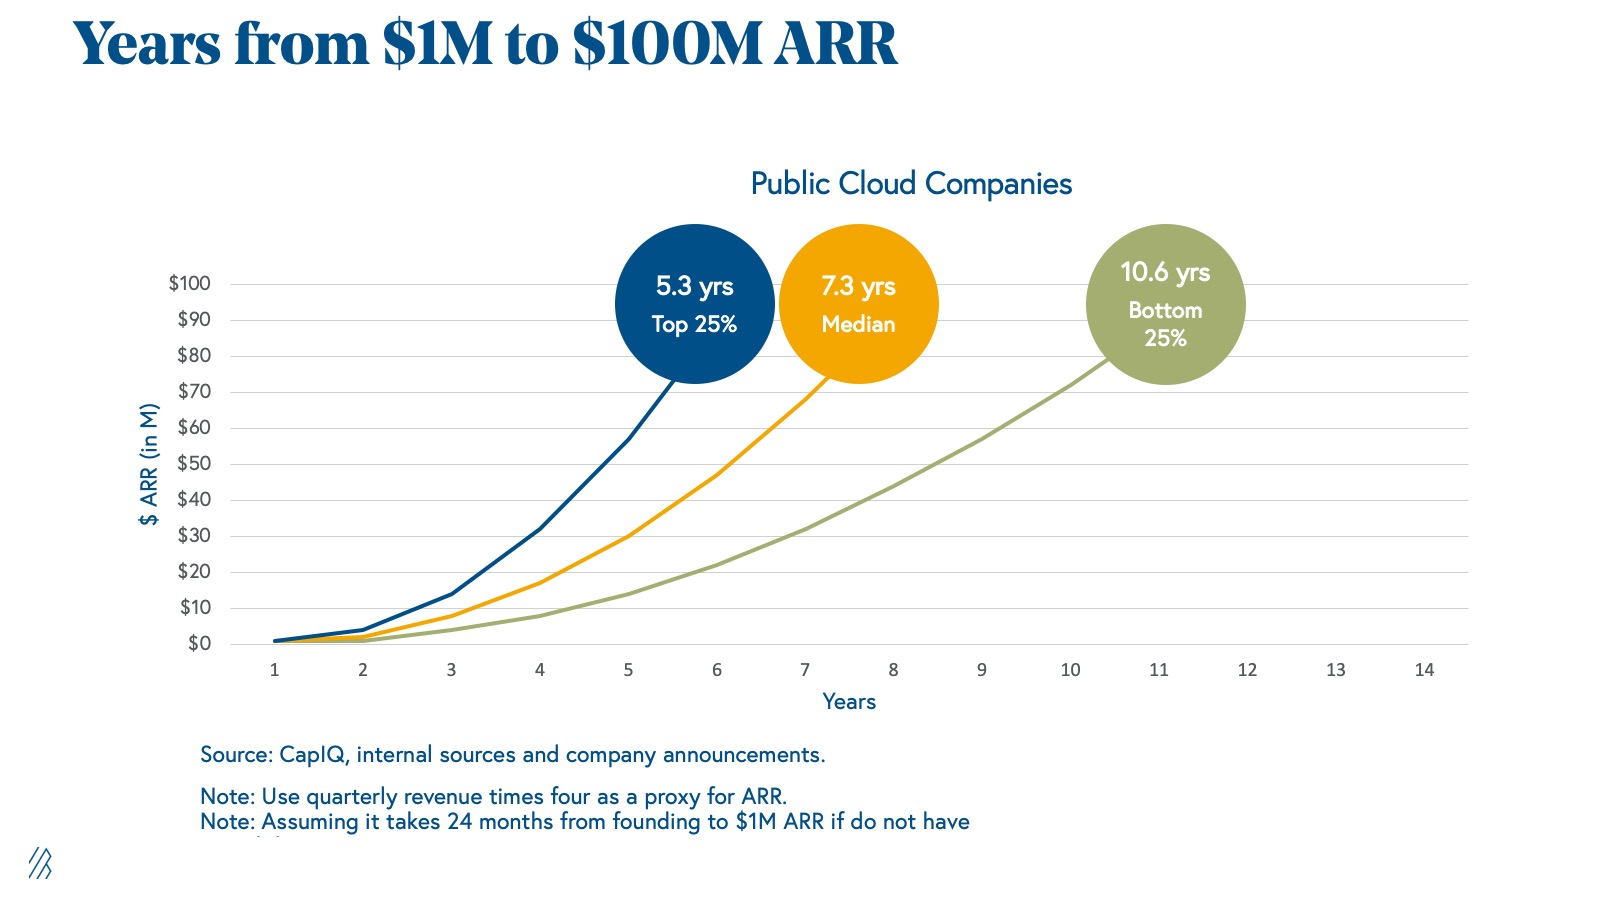 Years it took for companies to go from $1 million to $100 million AAR